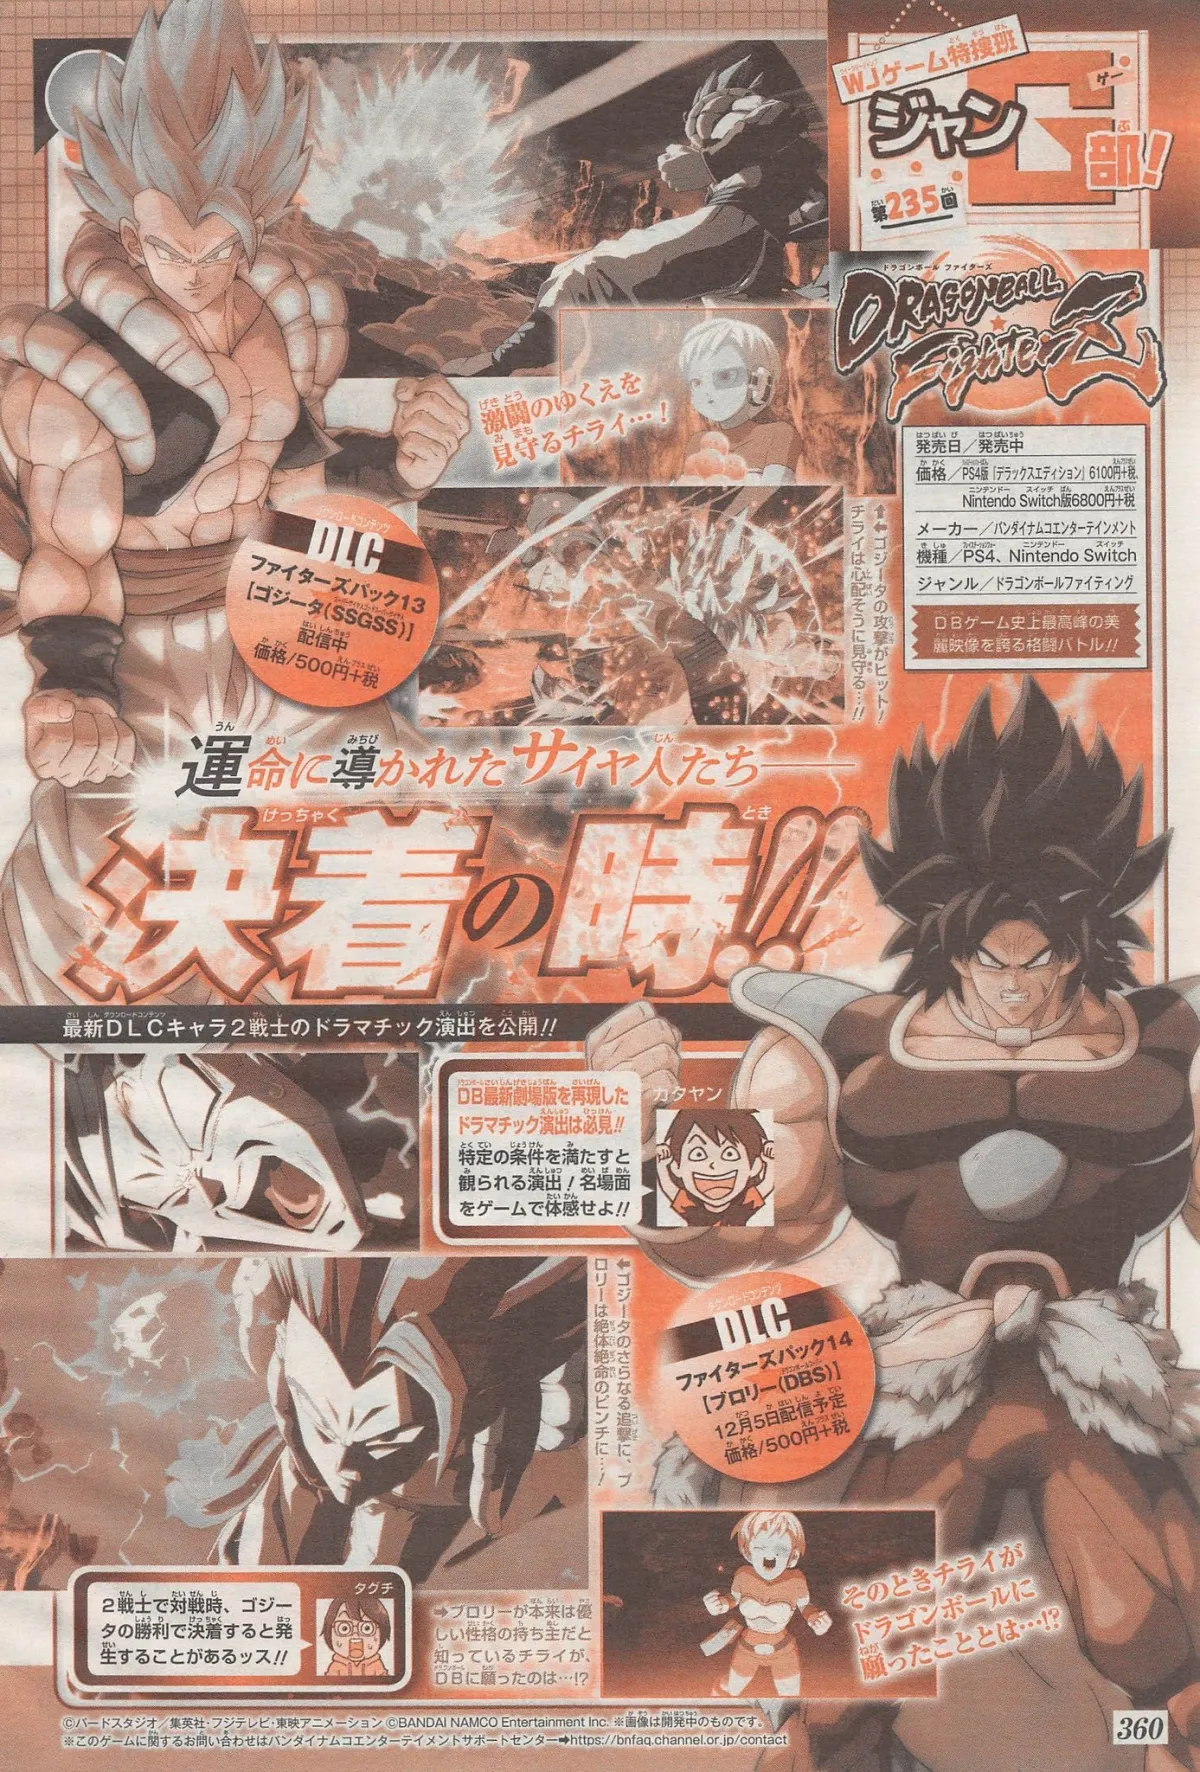 Dragon Ball FighterZ Broly DBS Scan